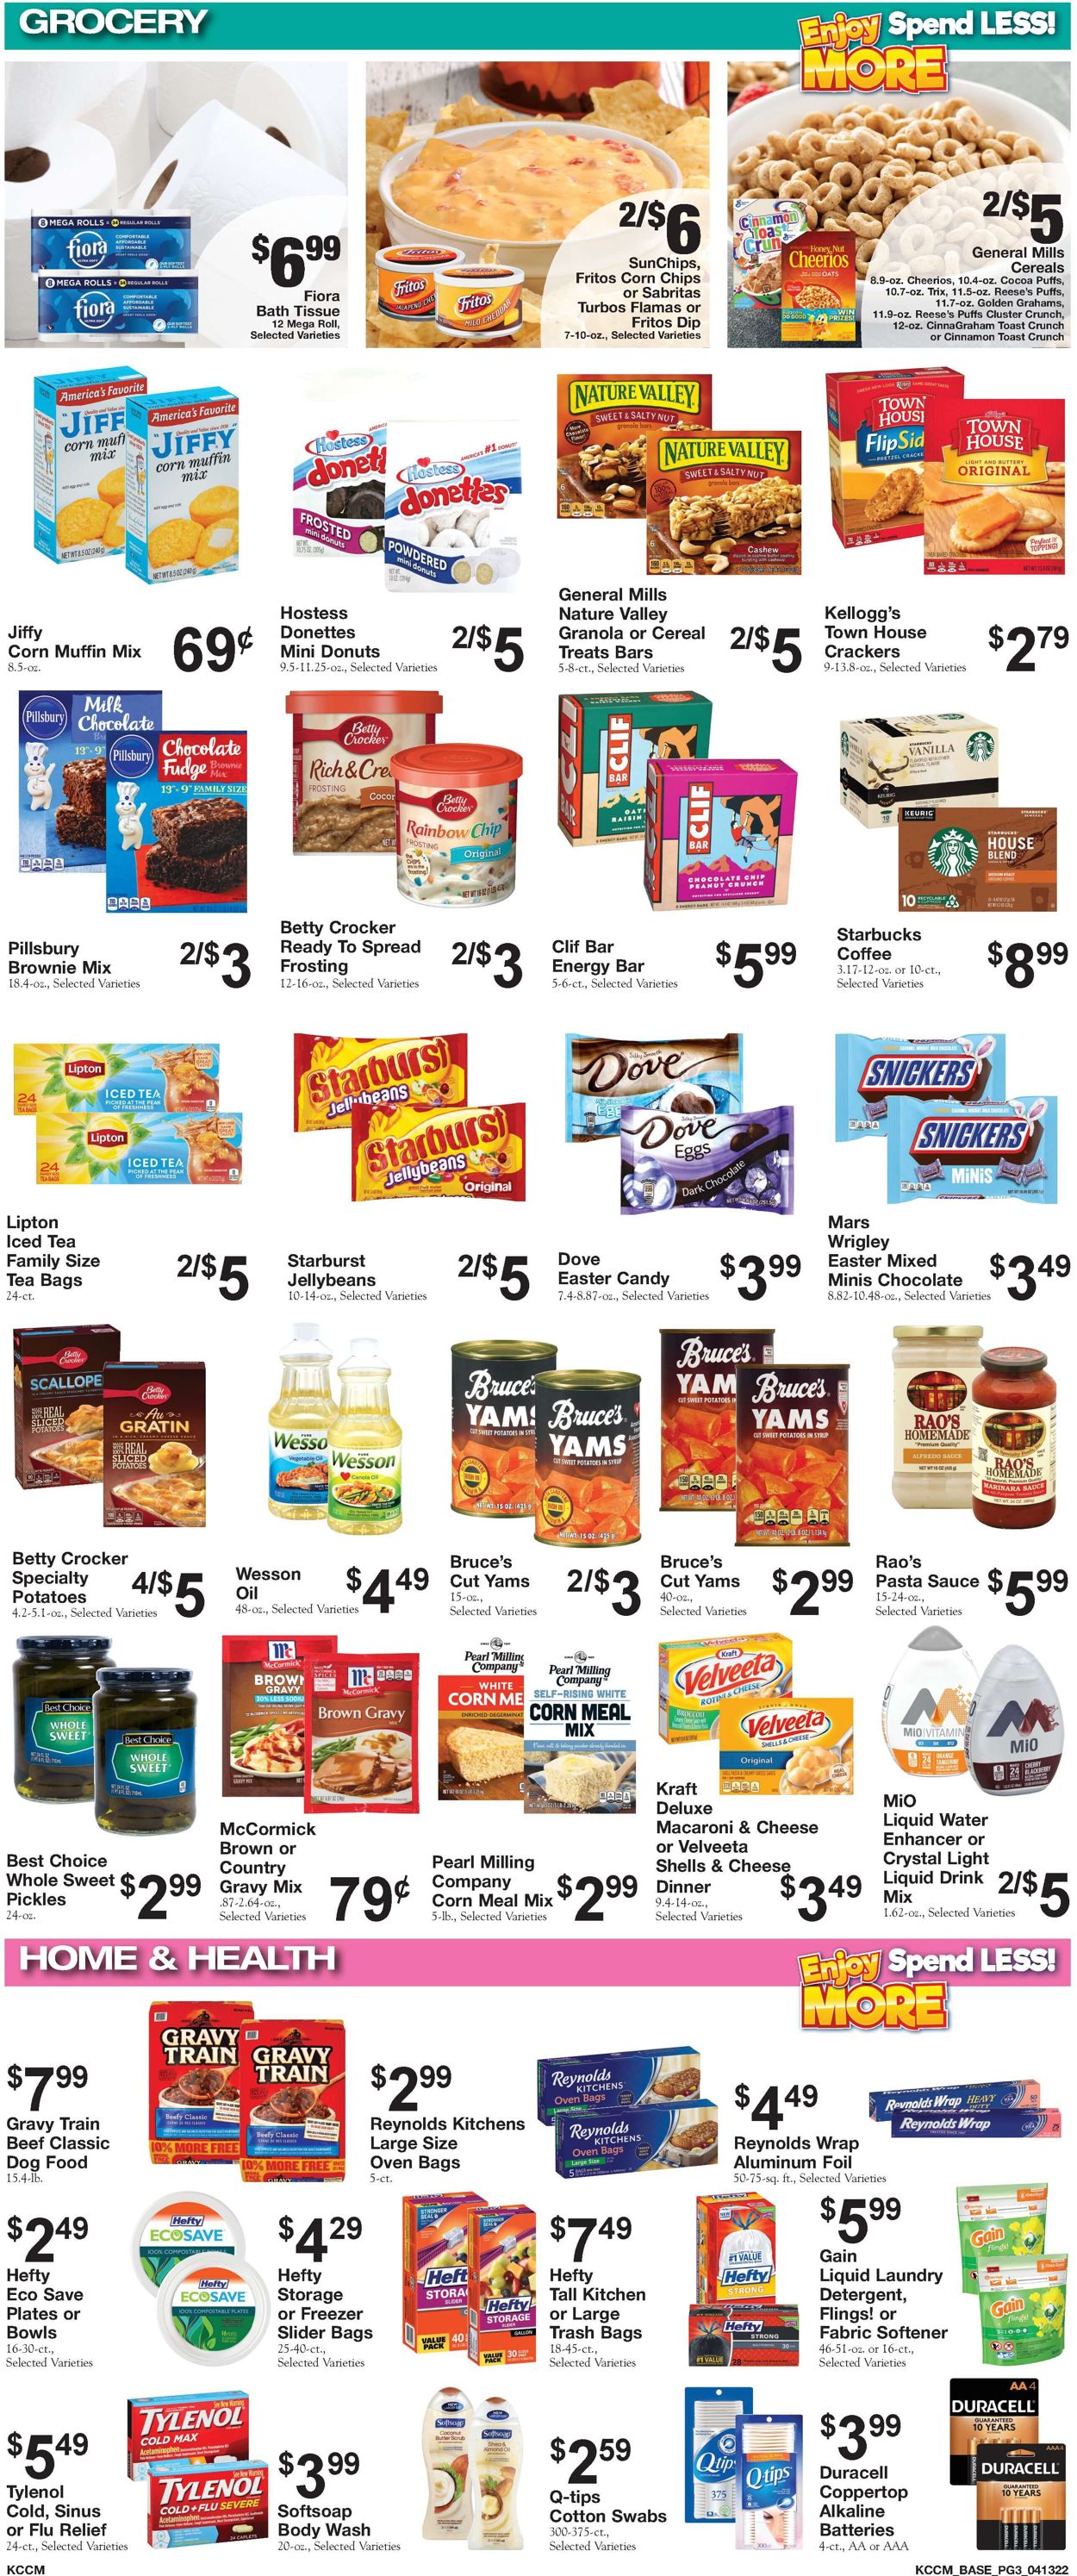 Catalogue Country Mart EASTER AD 2022 from 04/12/2022